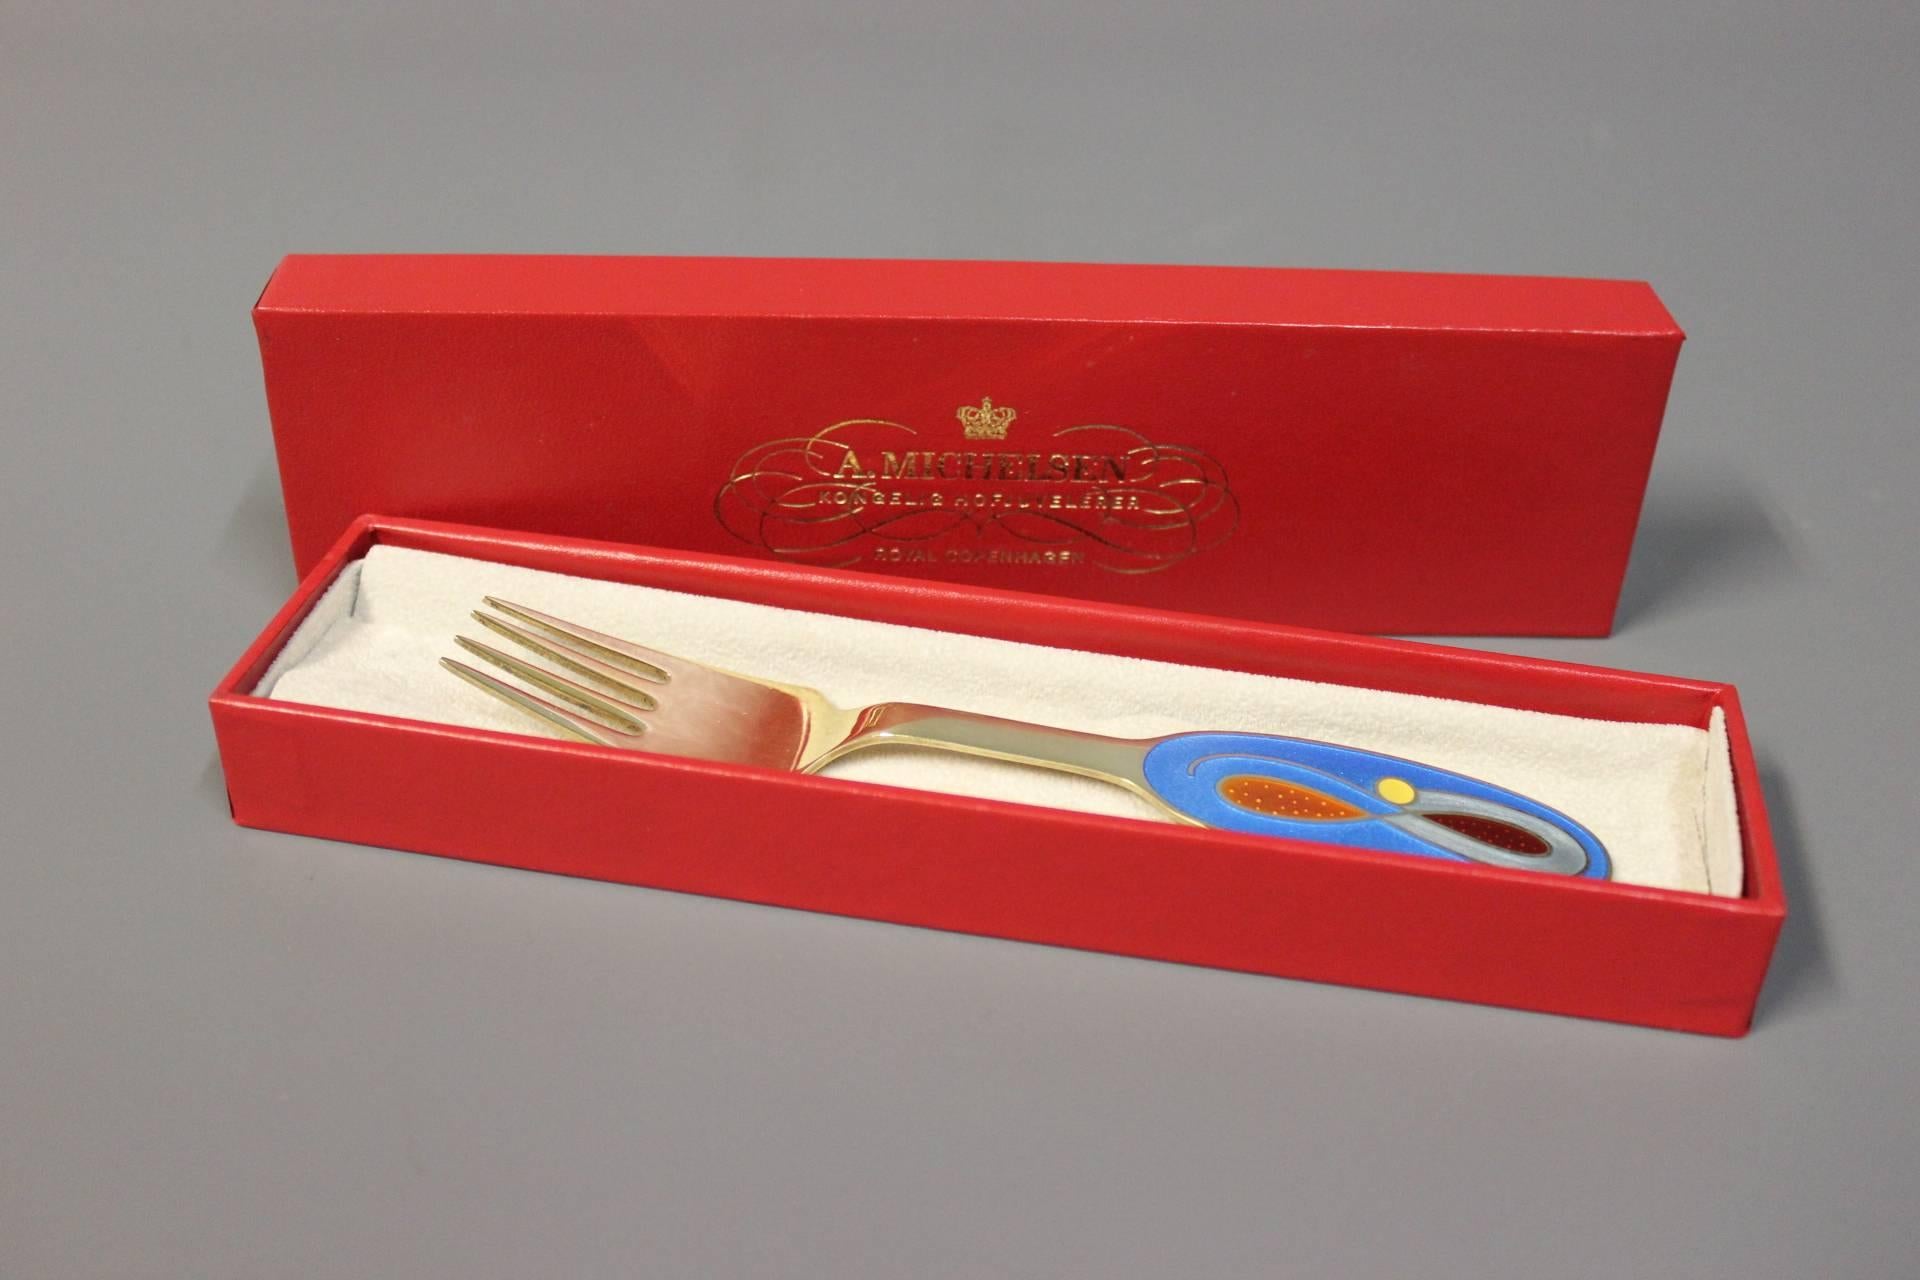 Danish Christmas Fork by A. Michelsen from 1992